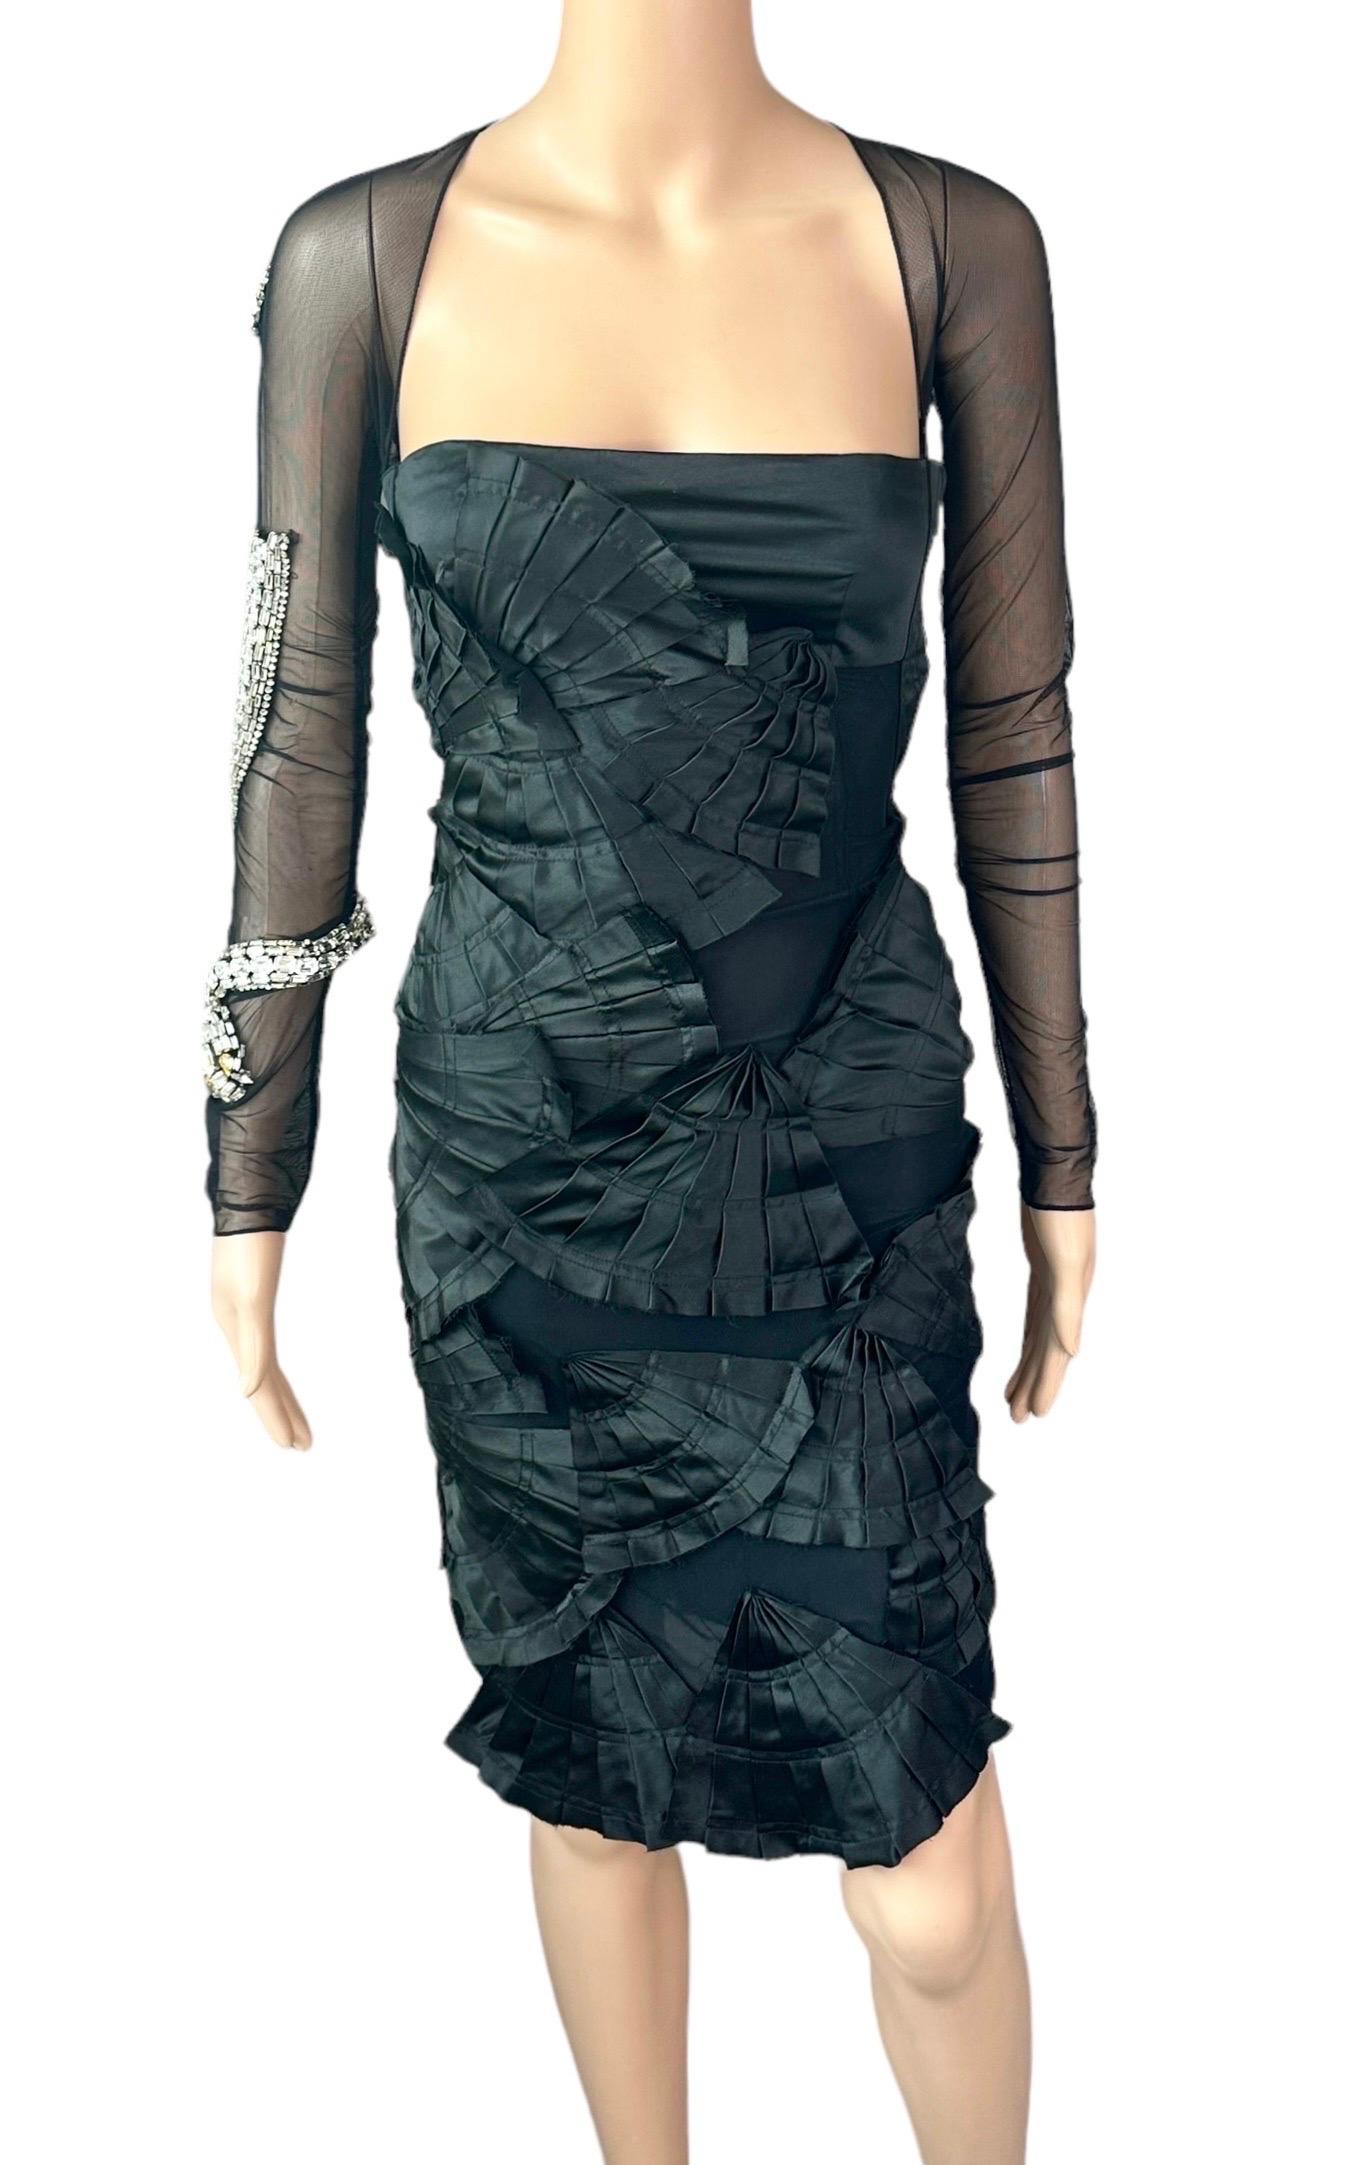 Tom Ford for Gucci S/S 2004 Runway Embellished Snake Sheer Cutout Black Dress In Fair Condition For Sale In Naples, FL